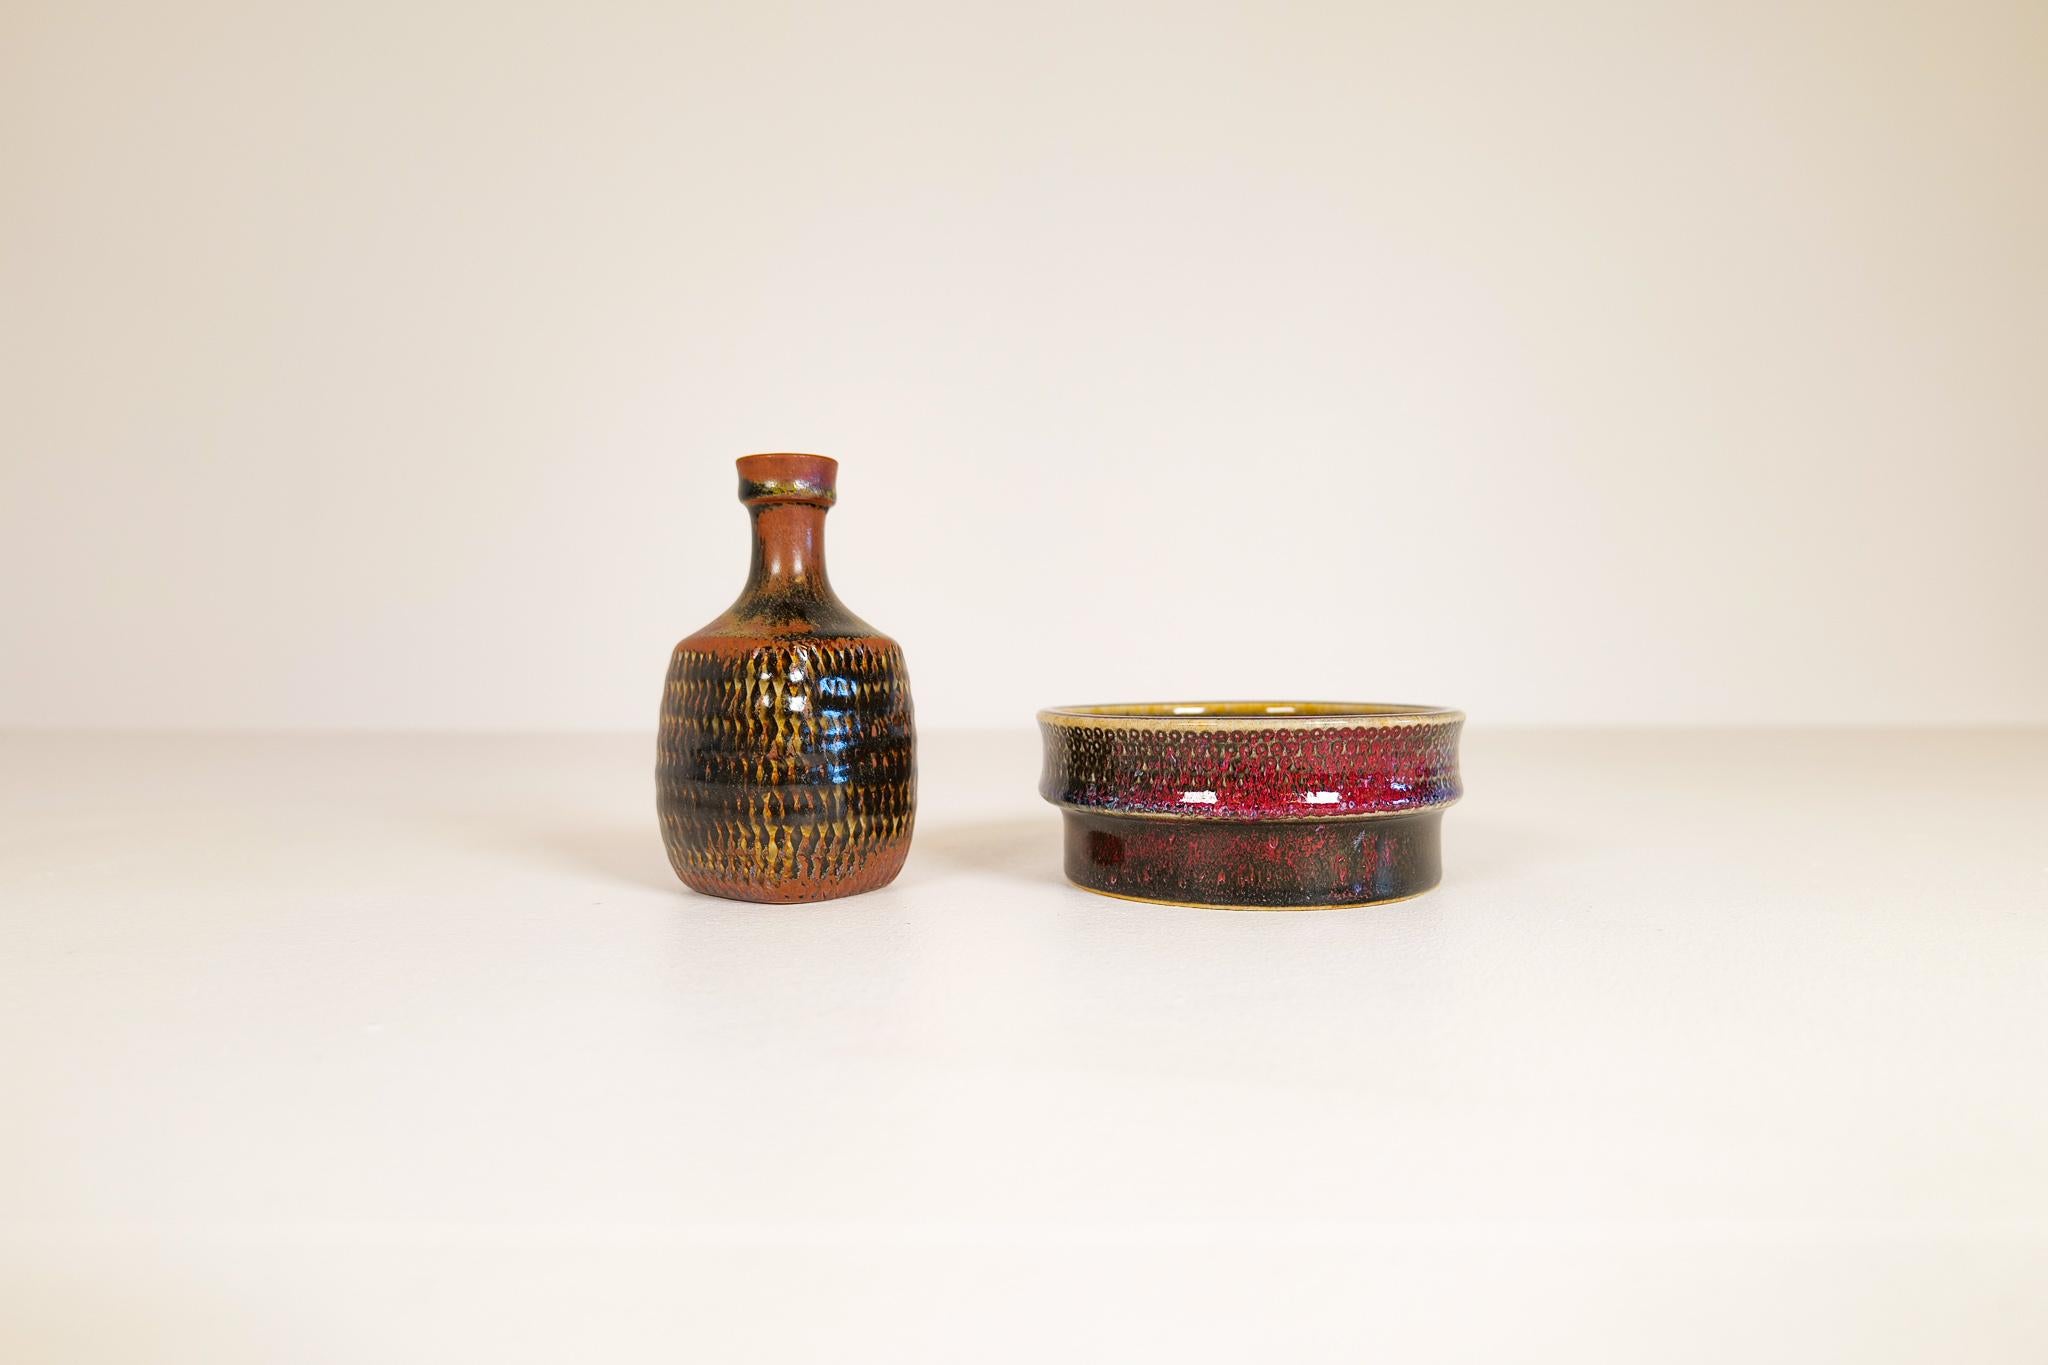 These two unique and wonderful sculptured ceramic pieces was made at Gustavberg Sweden during the 1960s and designed by famous Stig Lindberg. They both have Lindbergs signature engraved into the bottom of the ceramic together with the well-known